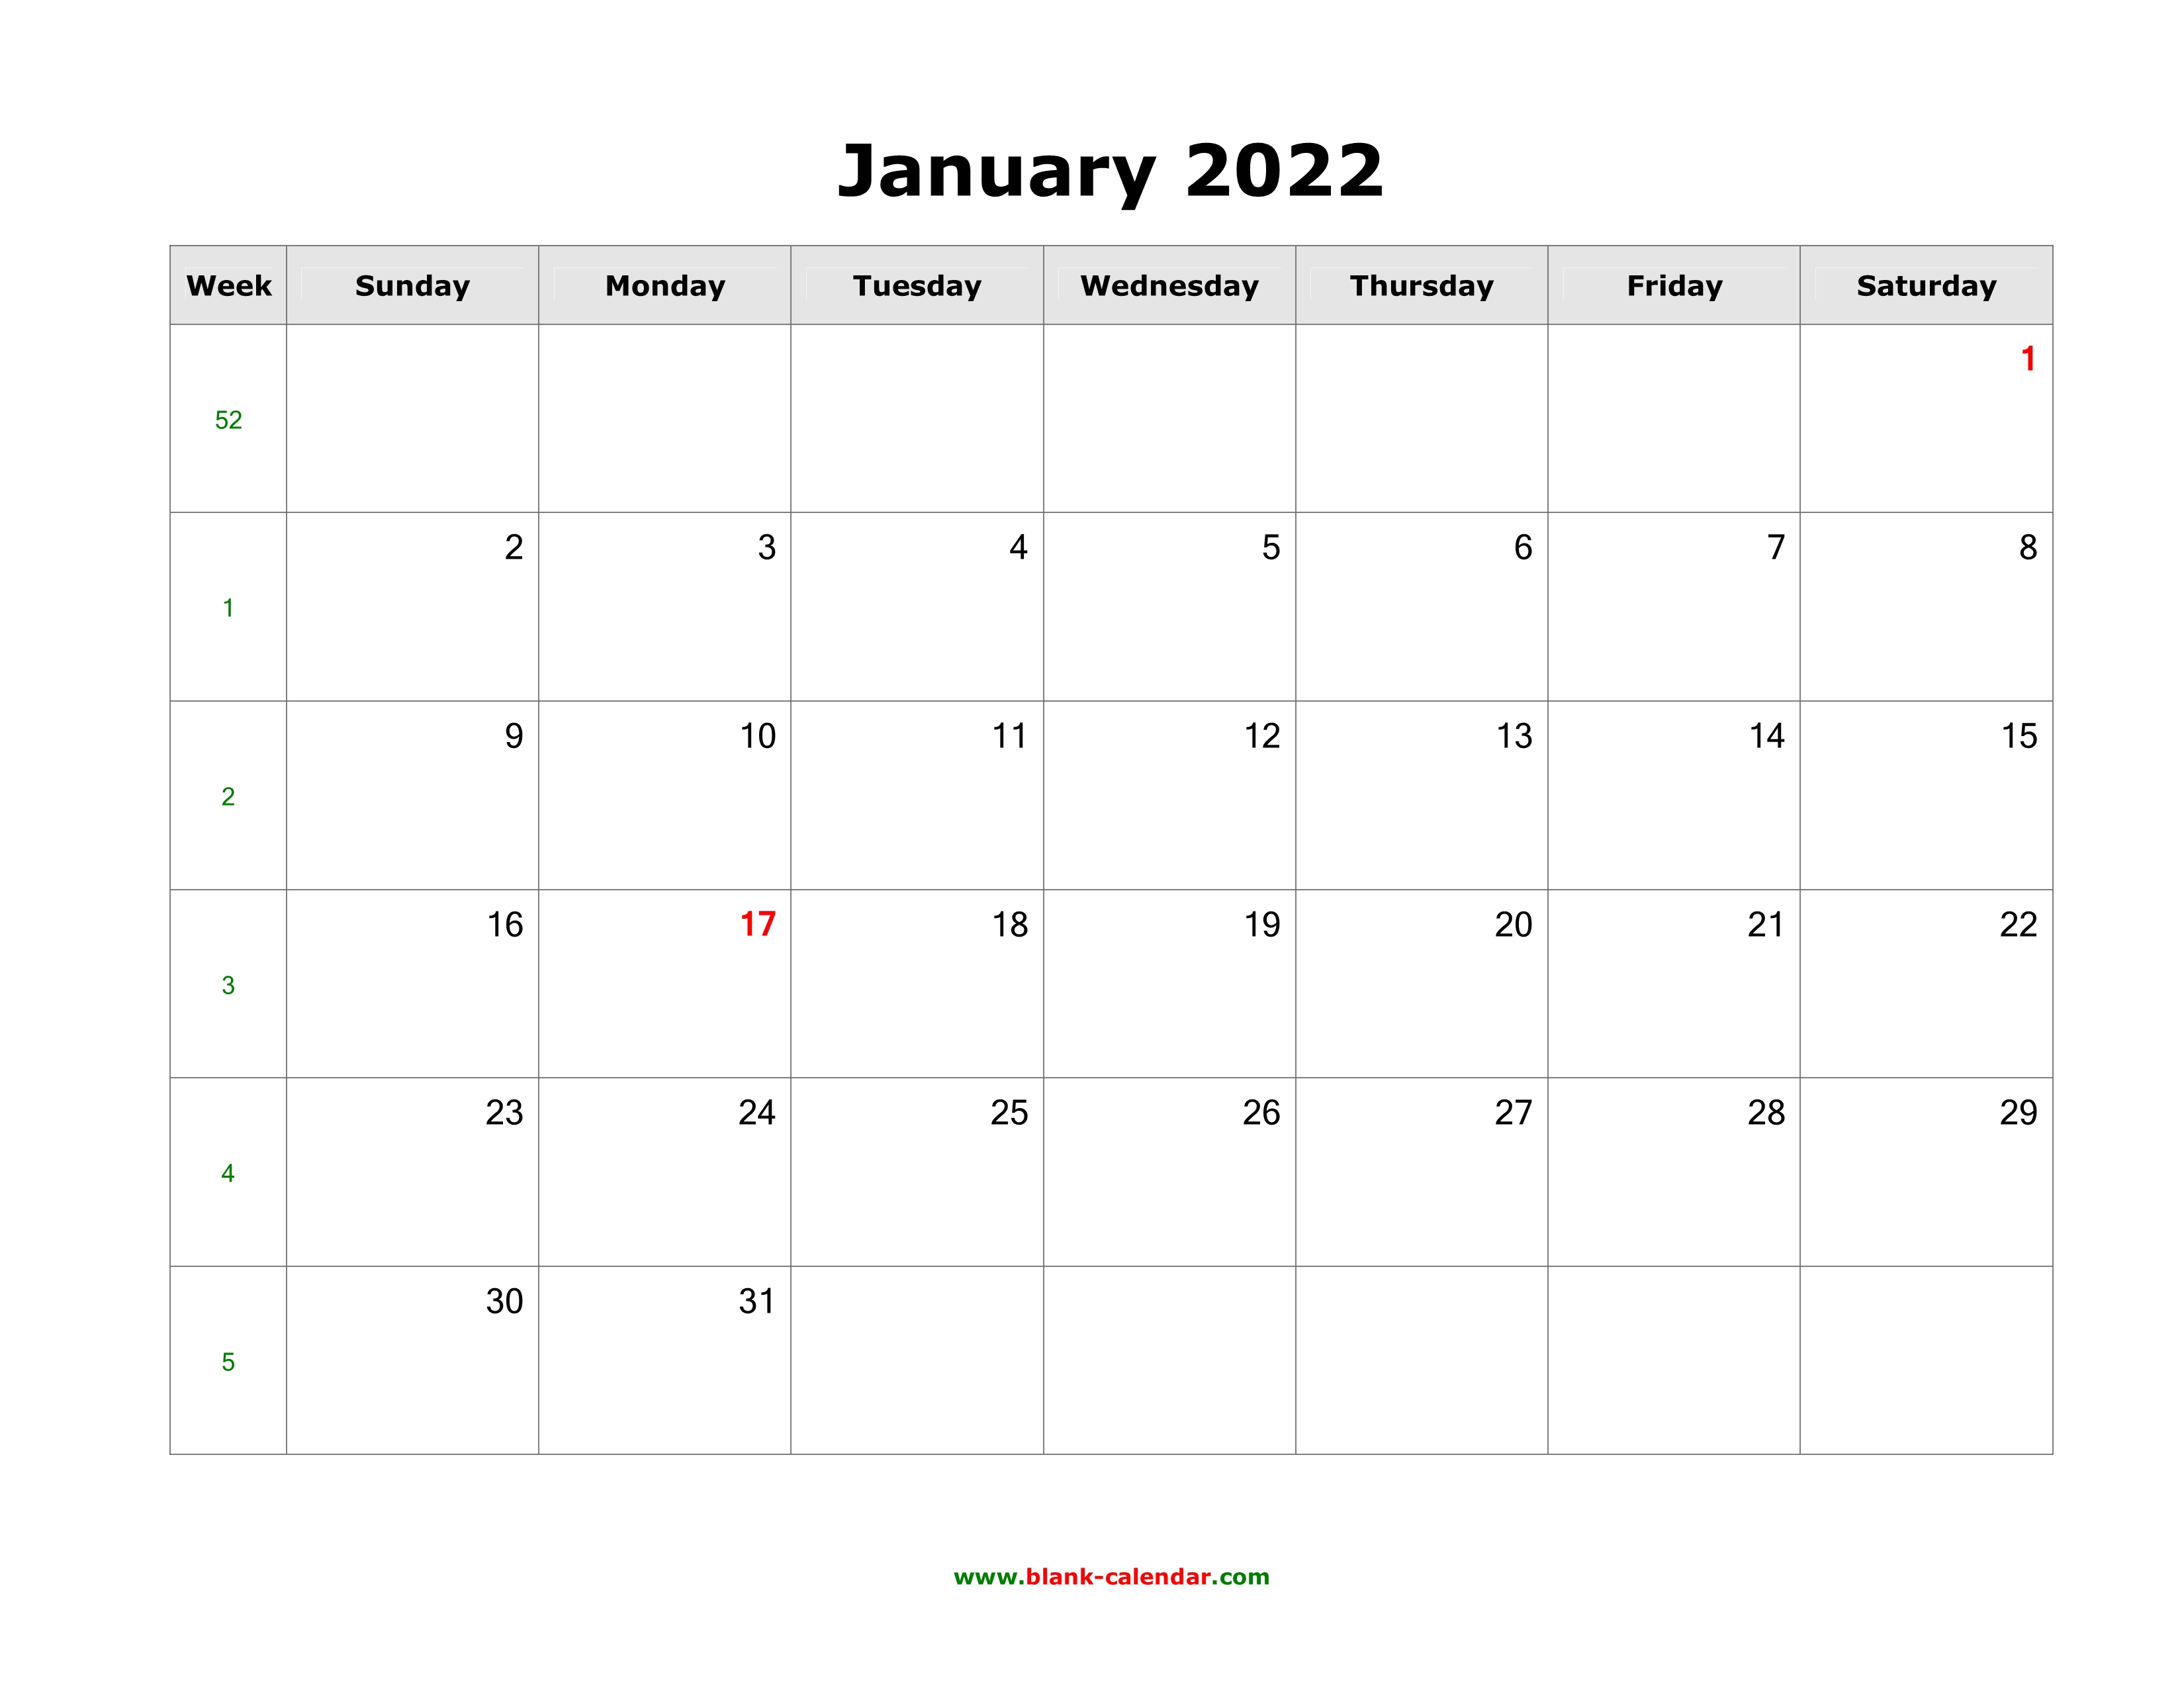 Download Blank Calendar 2022 Download Blank Calendar 2022 (12 Pages, One Month Per Page, Horizontal)